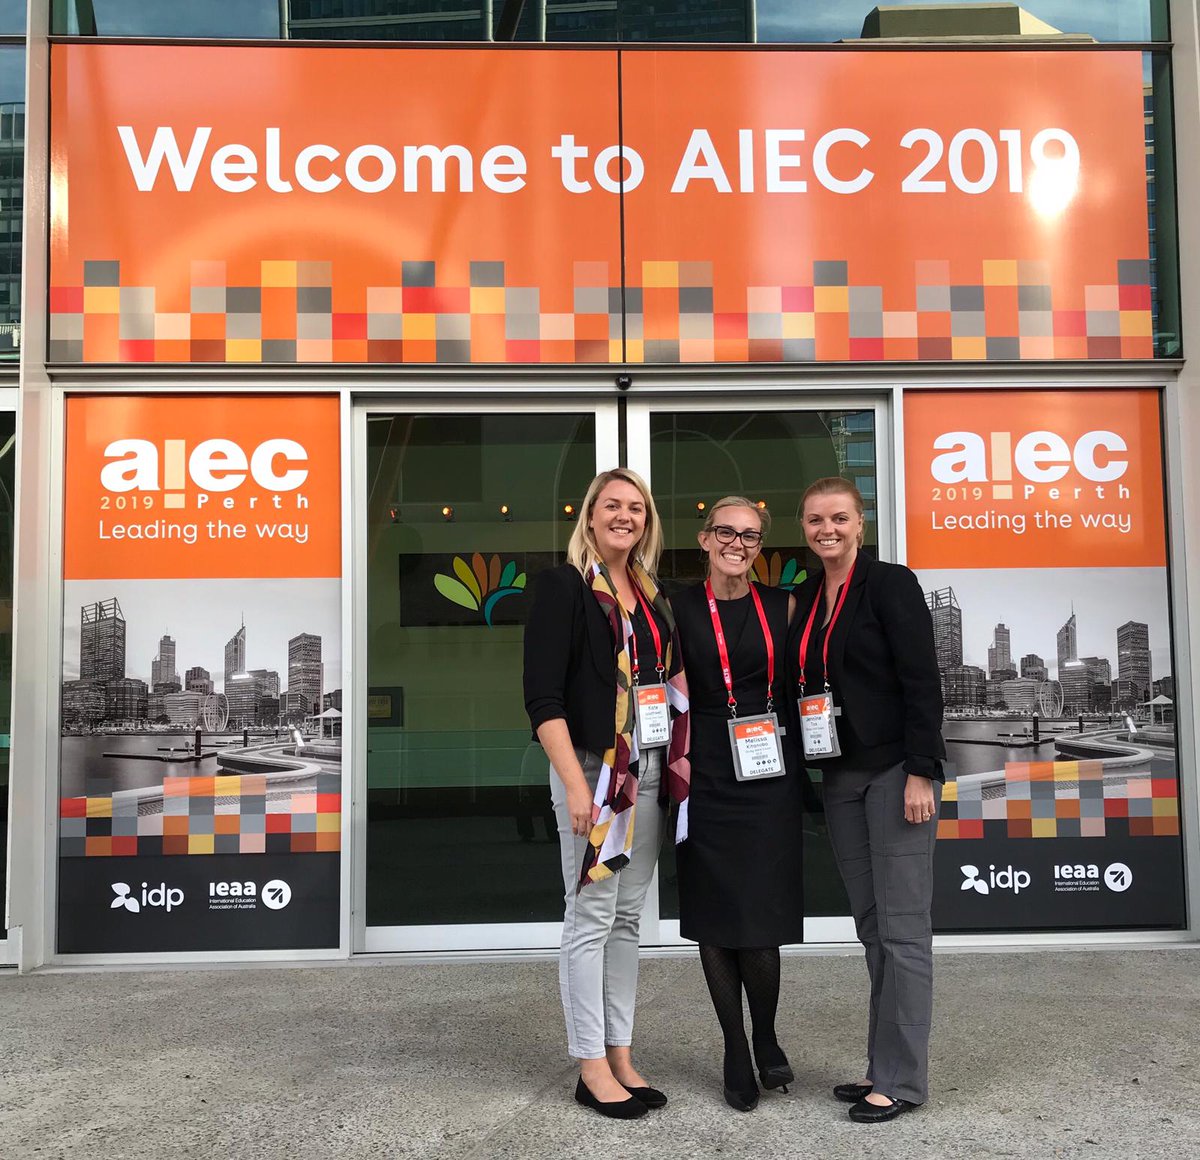 The #GoldCoast is hosting the Australian International Education Conference #AIEC 2020. We are proud to have been part of this bid and the #StudyGoldCoast team are already looking forward and planning for this major event in #2020. The team at #AIEC2019 😀. #AIEC2020